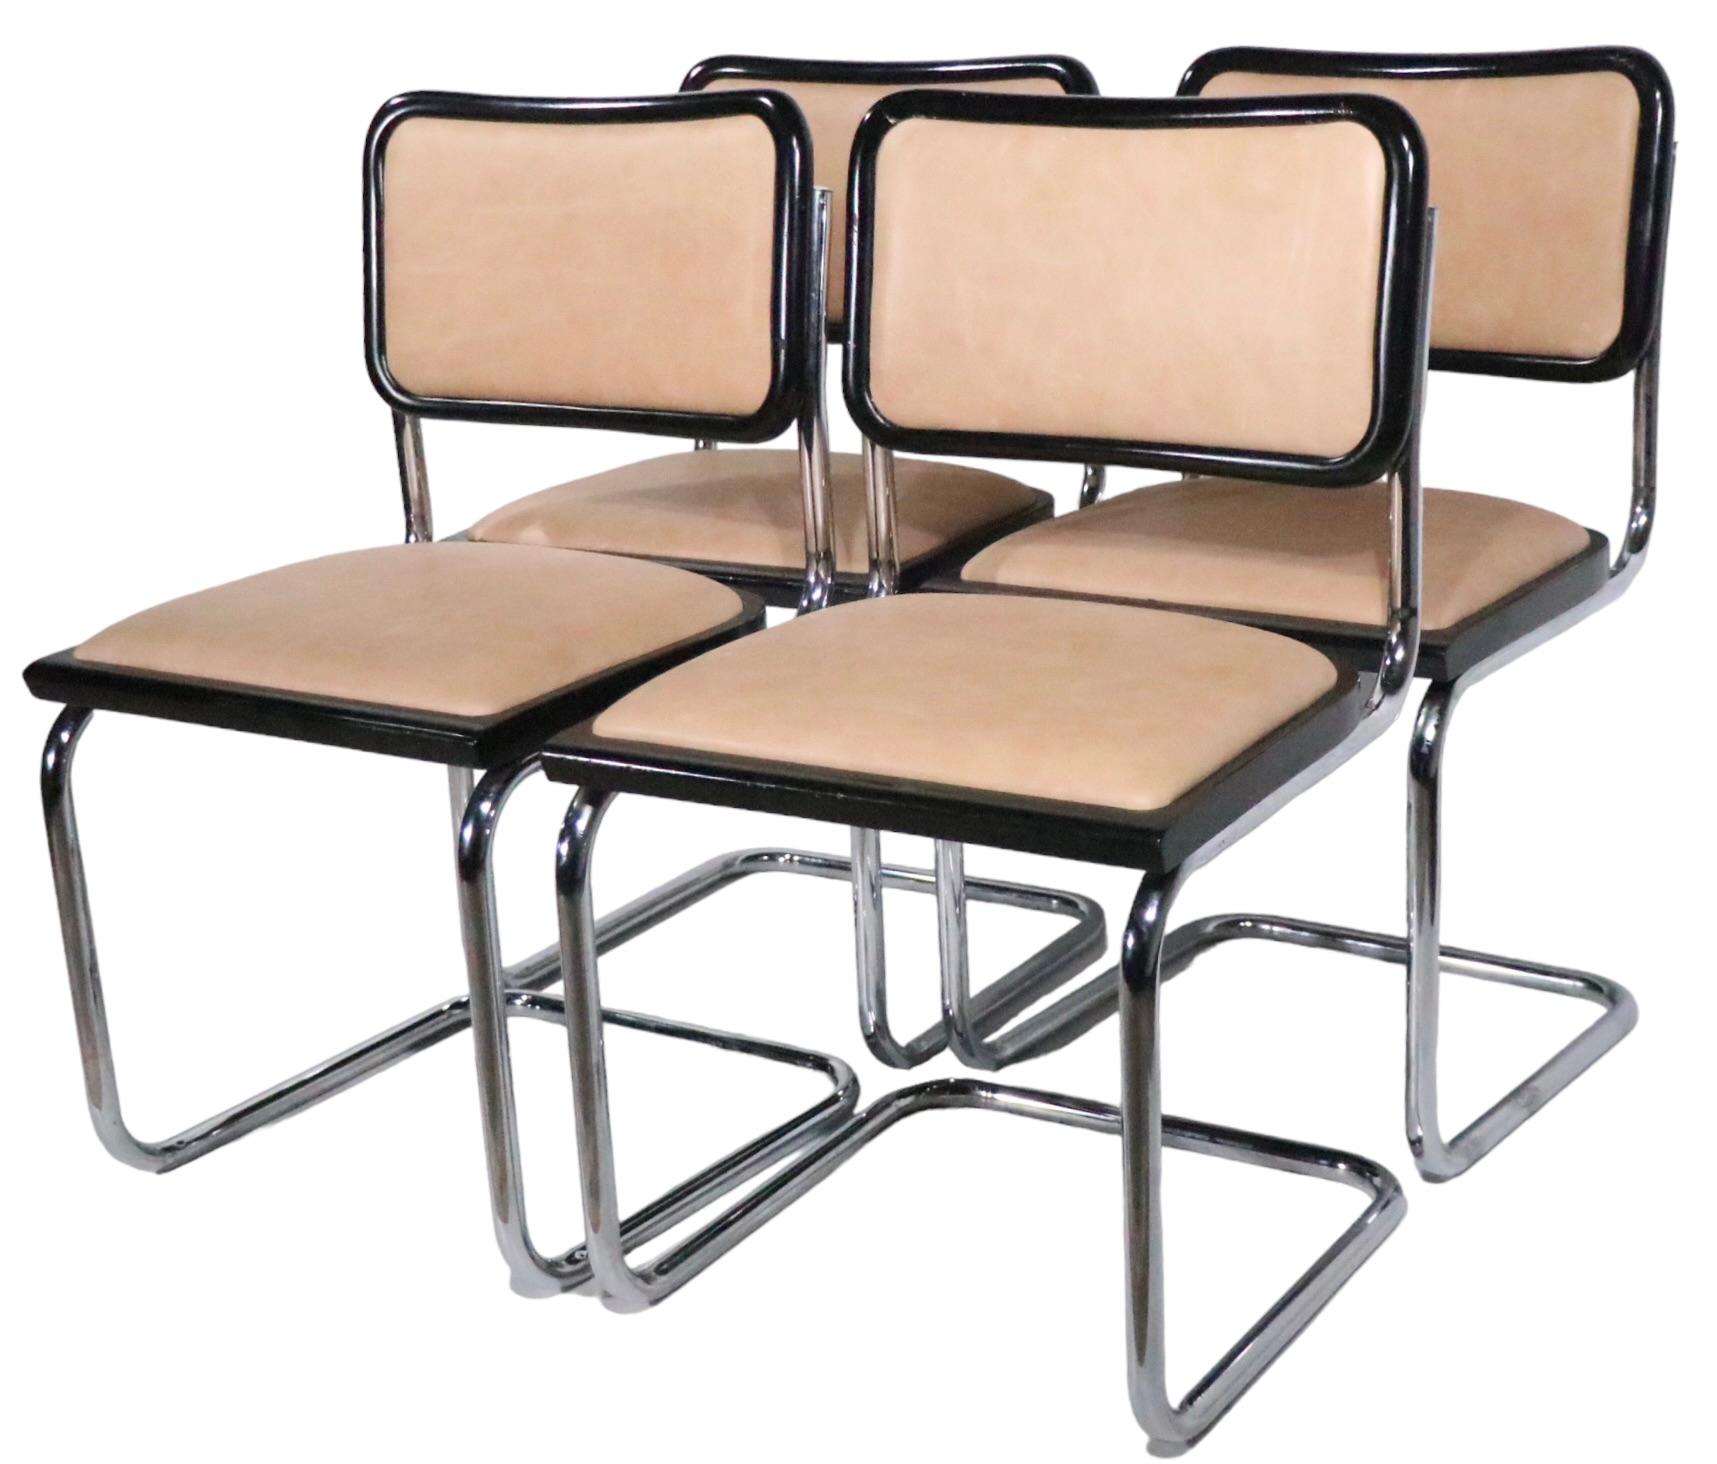 Set of Four Cesca Chairs Made in Italy Designed by Breuer c. 1970s For Sale 3